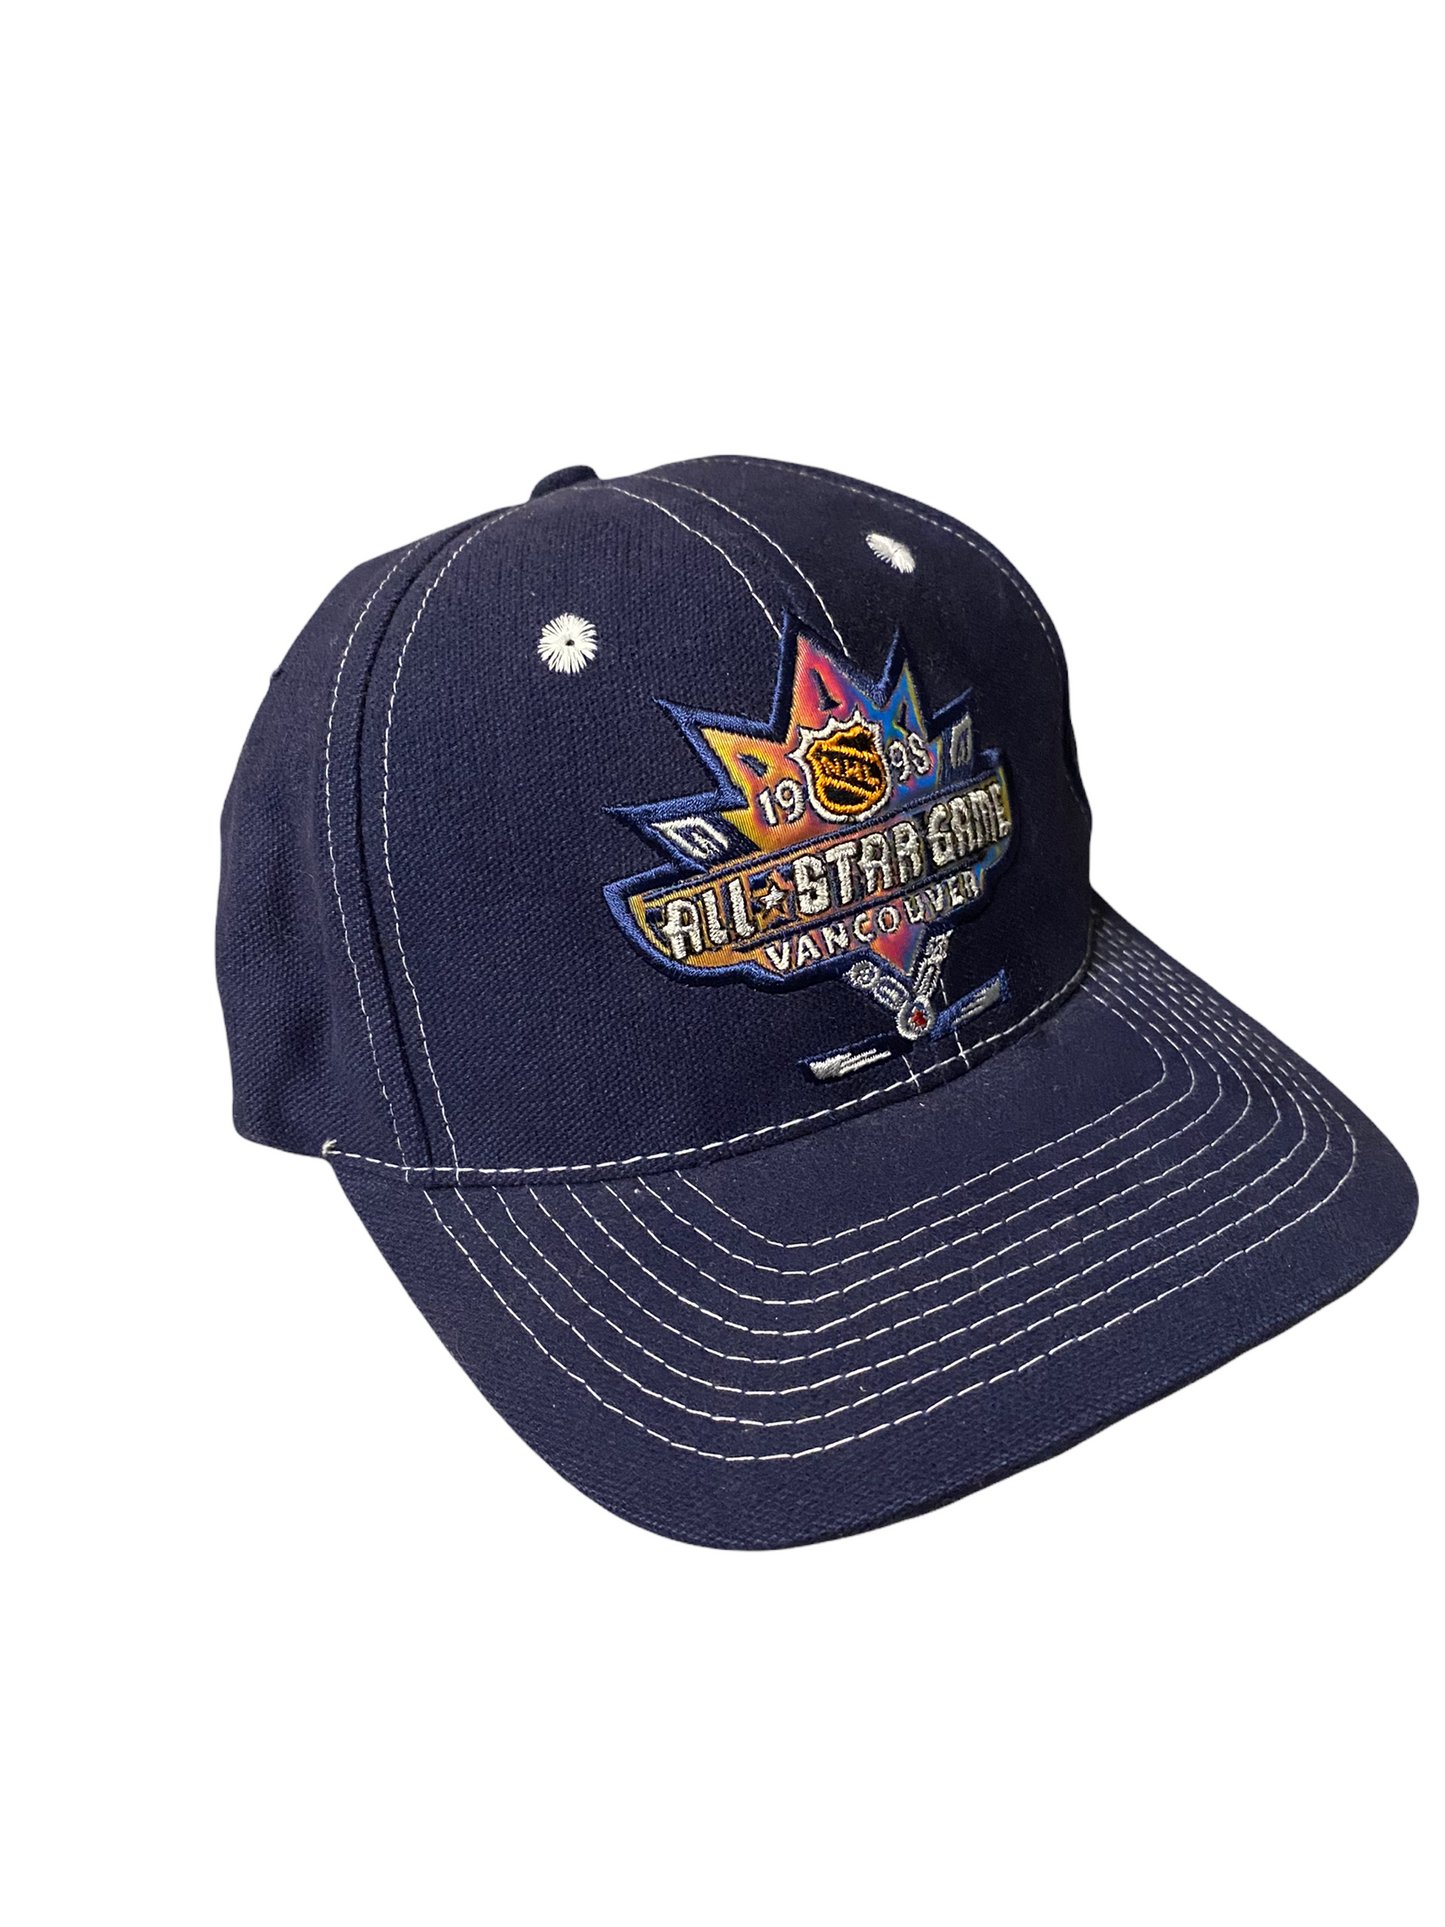 1998 NHL All Star Game Hat